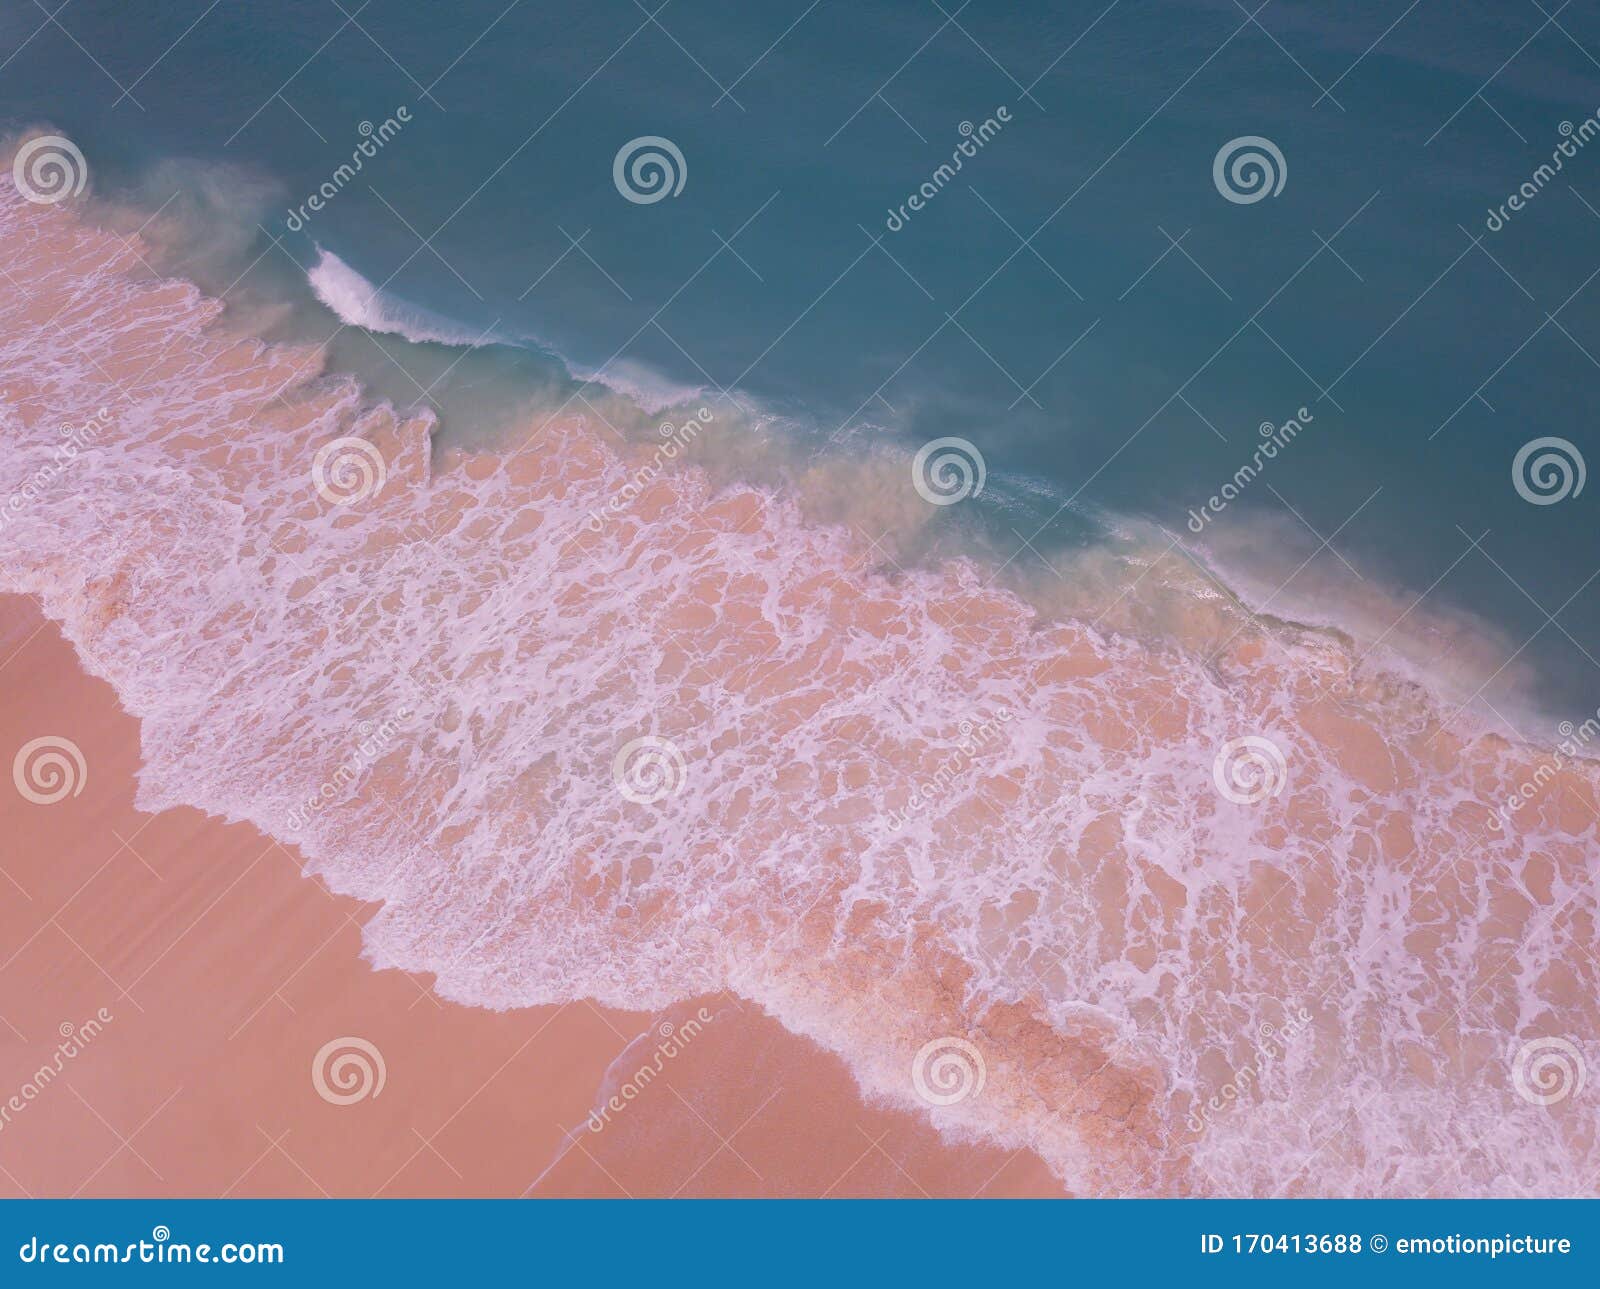 bahamas: aerial view turquoise water of pink beach, summer vacation on harbour island, travel and dream beach concept